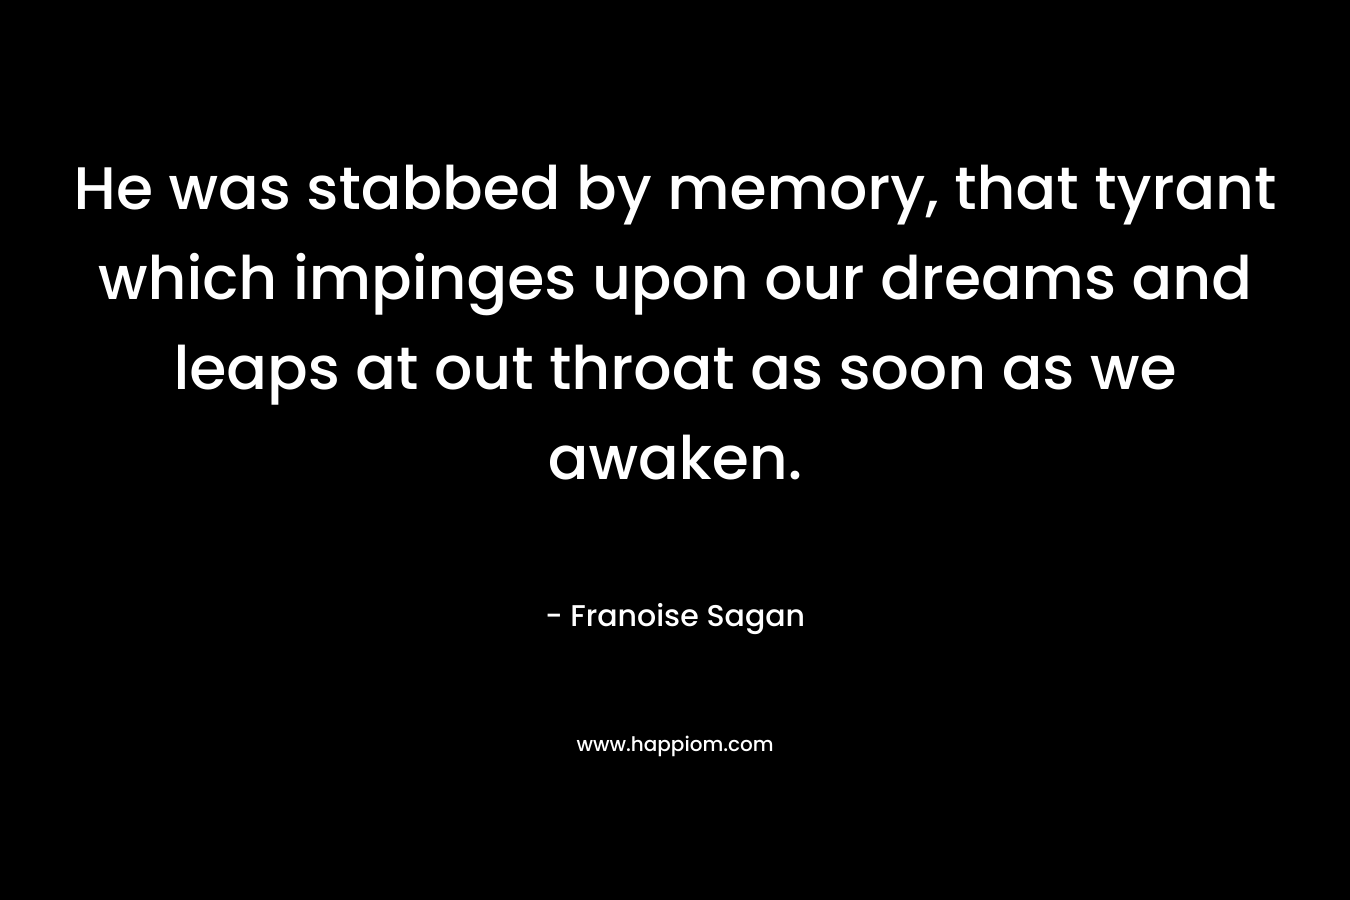 He was stabbed by memory, that tyrant which impinges upon our dreams and leaps at out throat as soon as we awaken.